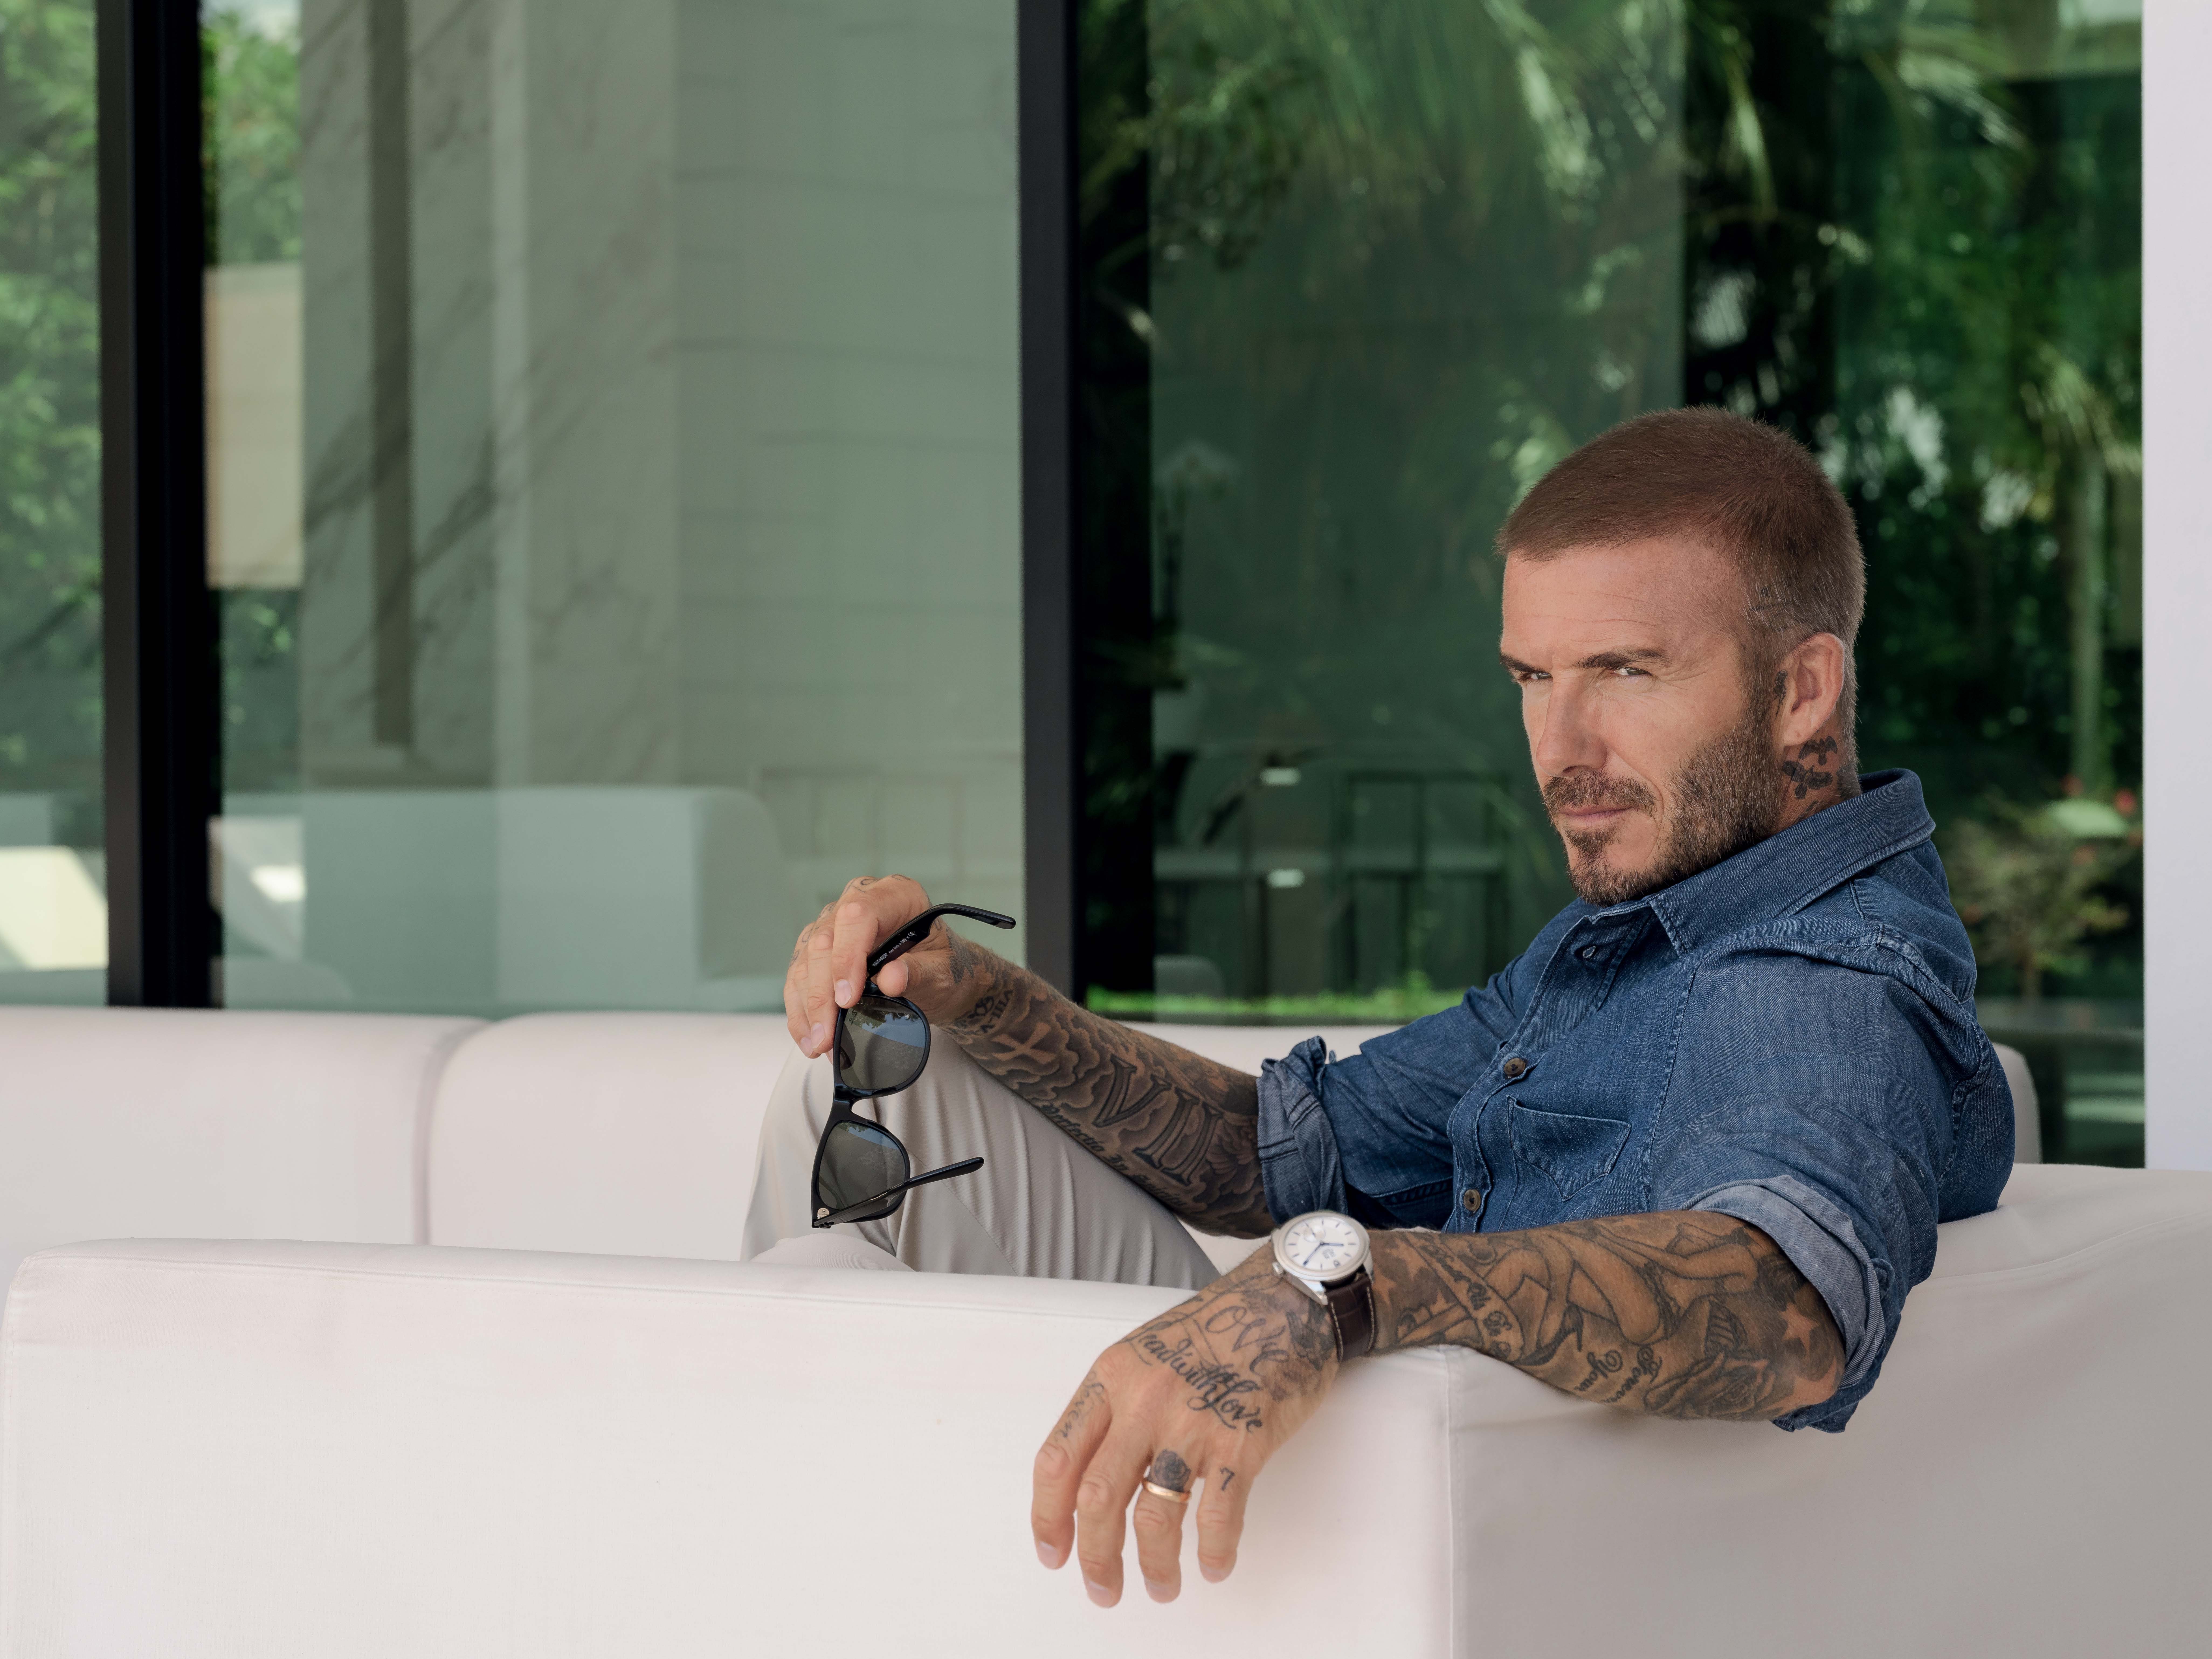 David Beckham was in Macau to announce plans for The Londoner Macao Hotel due to open progressively from 2020. As Sands Resorts Macao ambassador, the style icon has worked with top UK interior designers to bring ‘a little bit of London’ to the city.